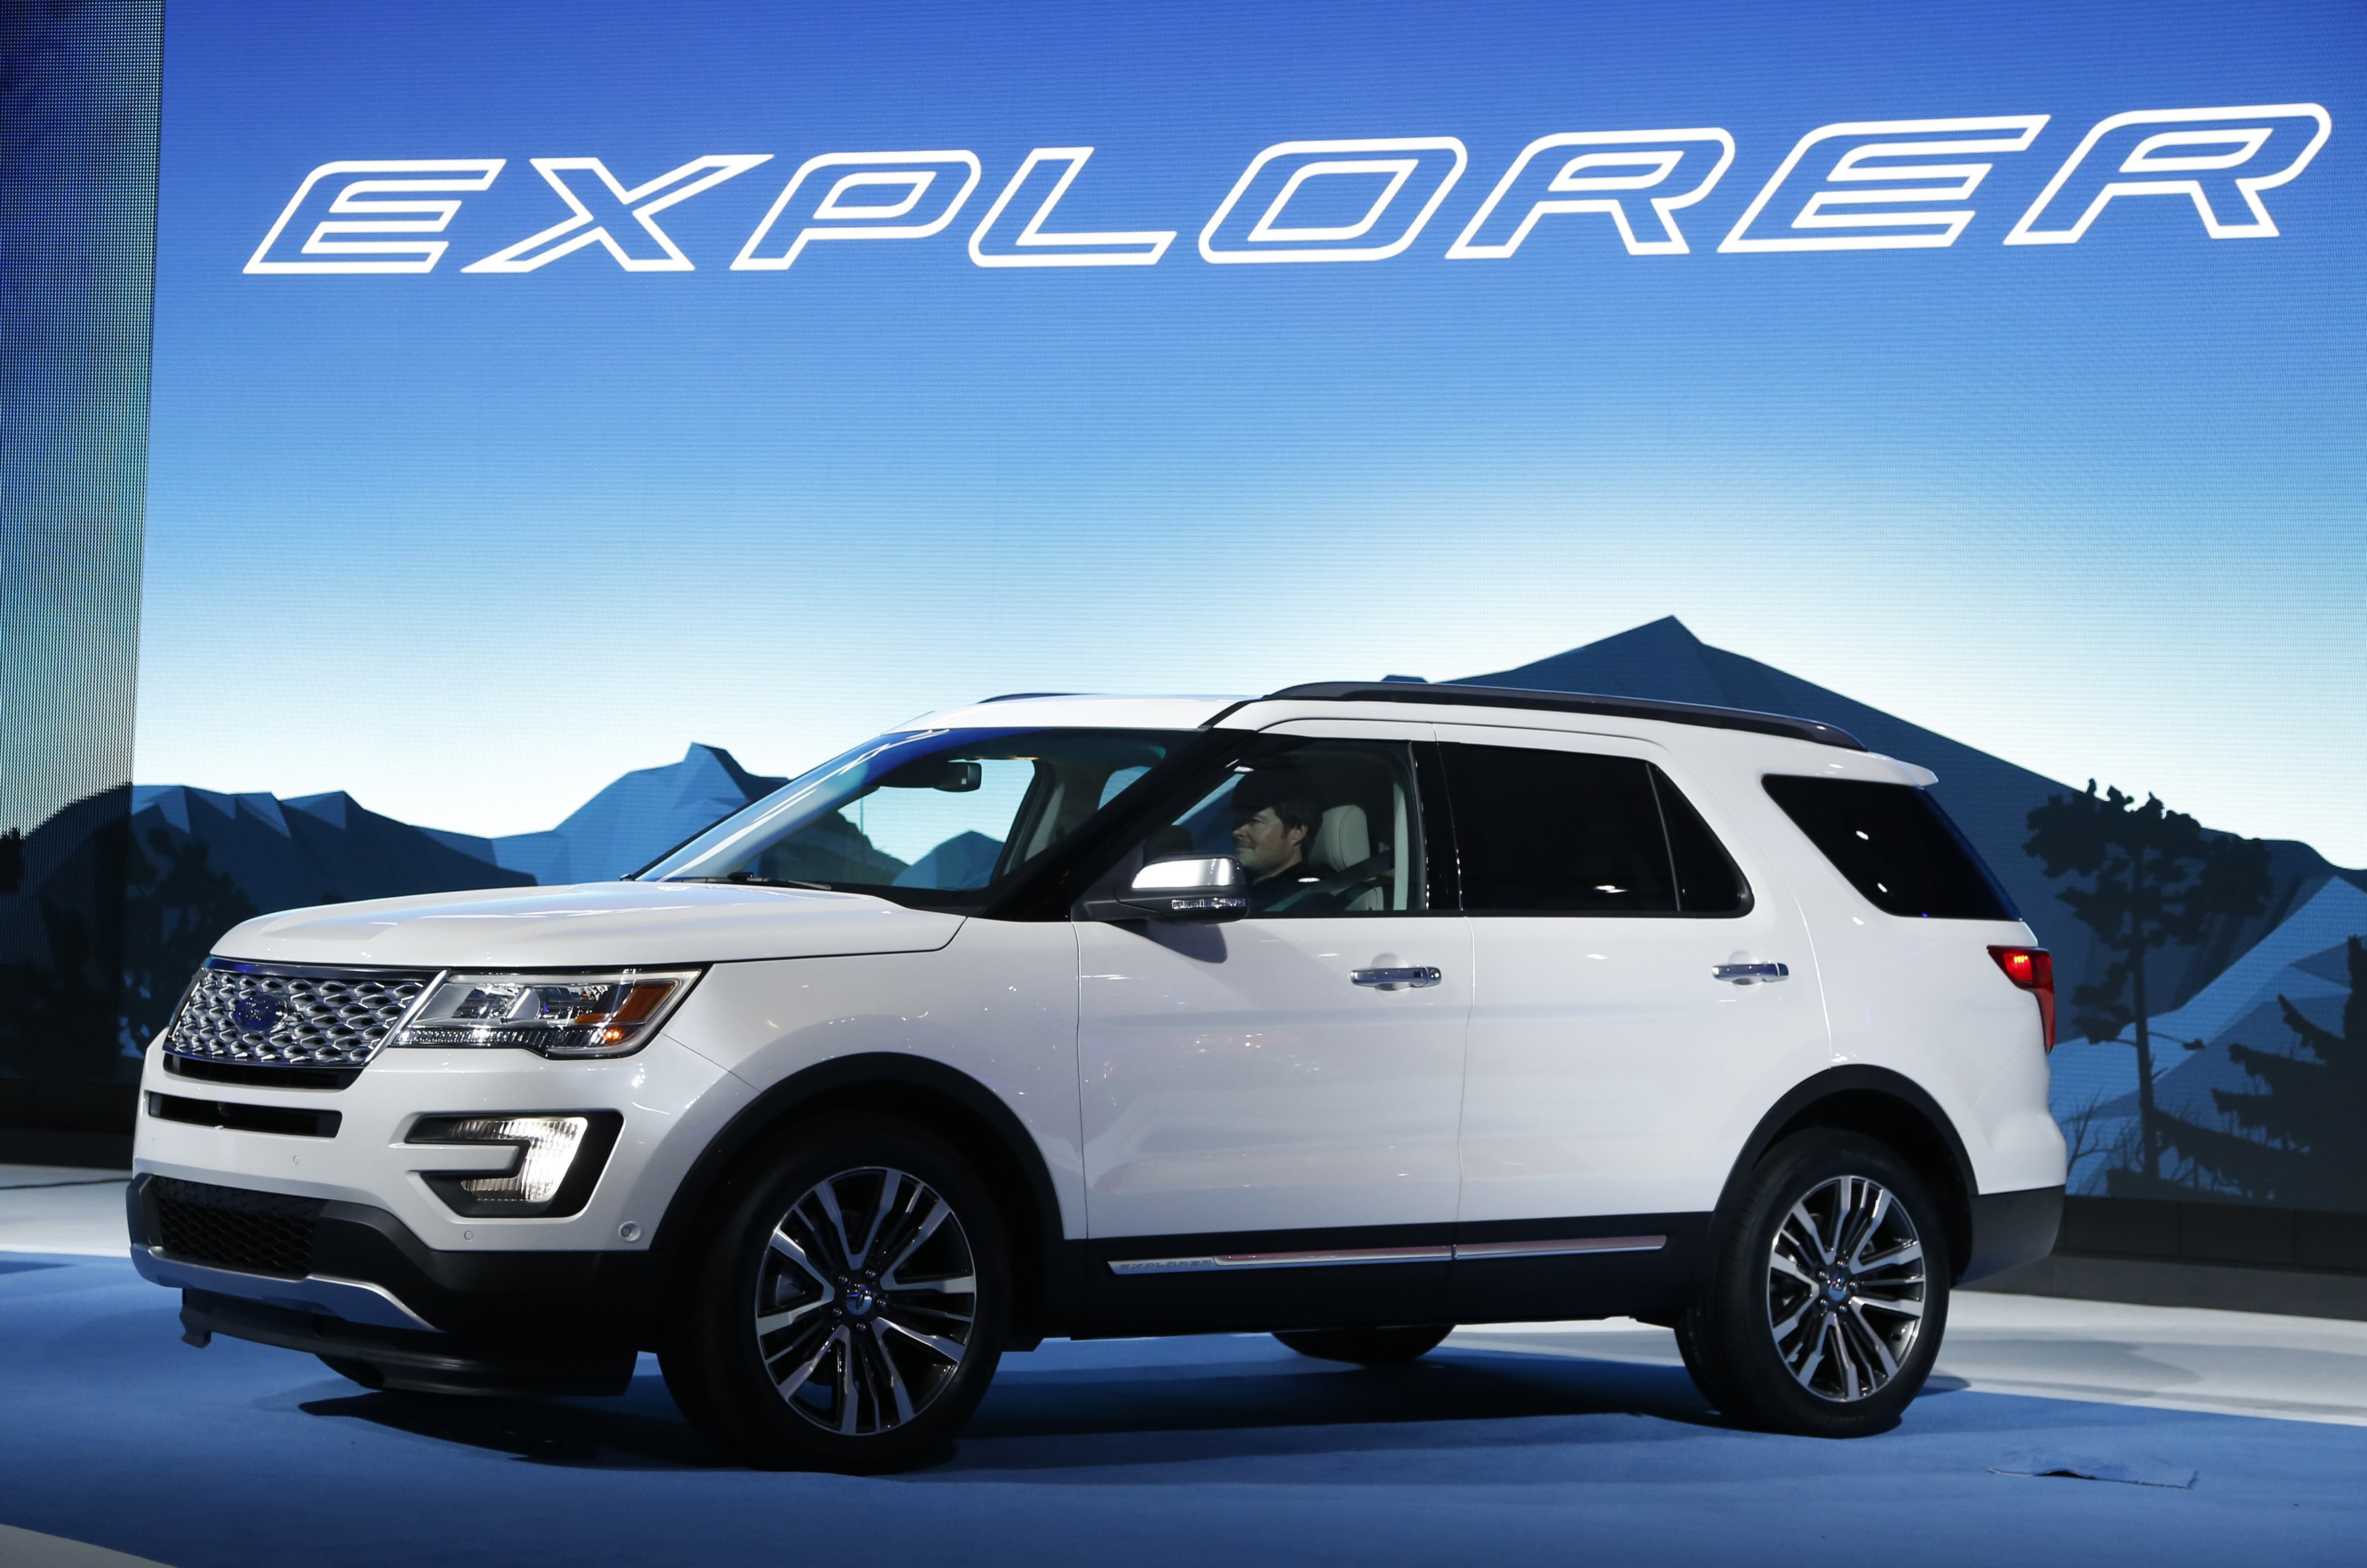 2016 Ford Explorer is shown during the model's world debut at the Los Angeles Auto Show